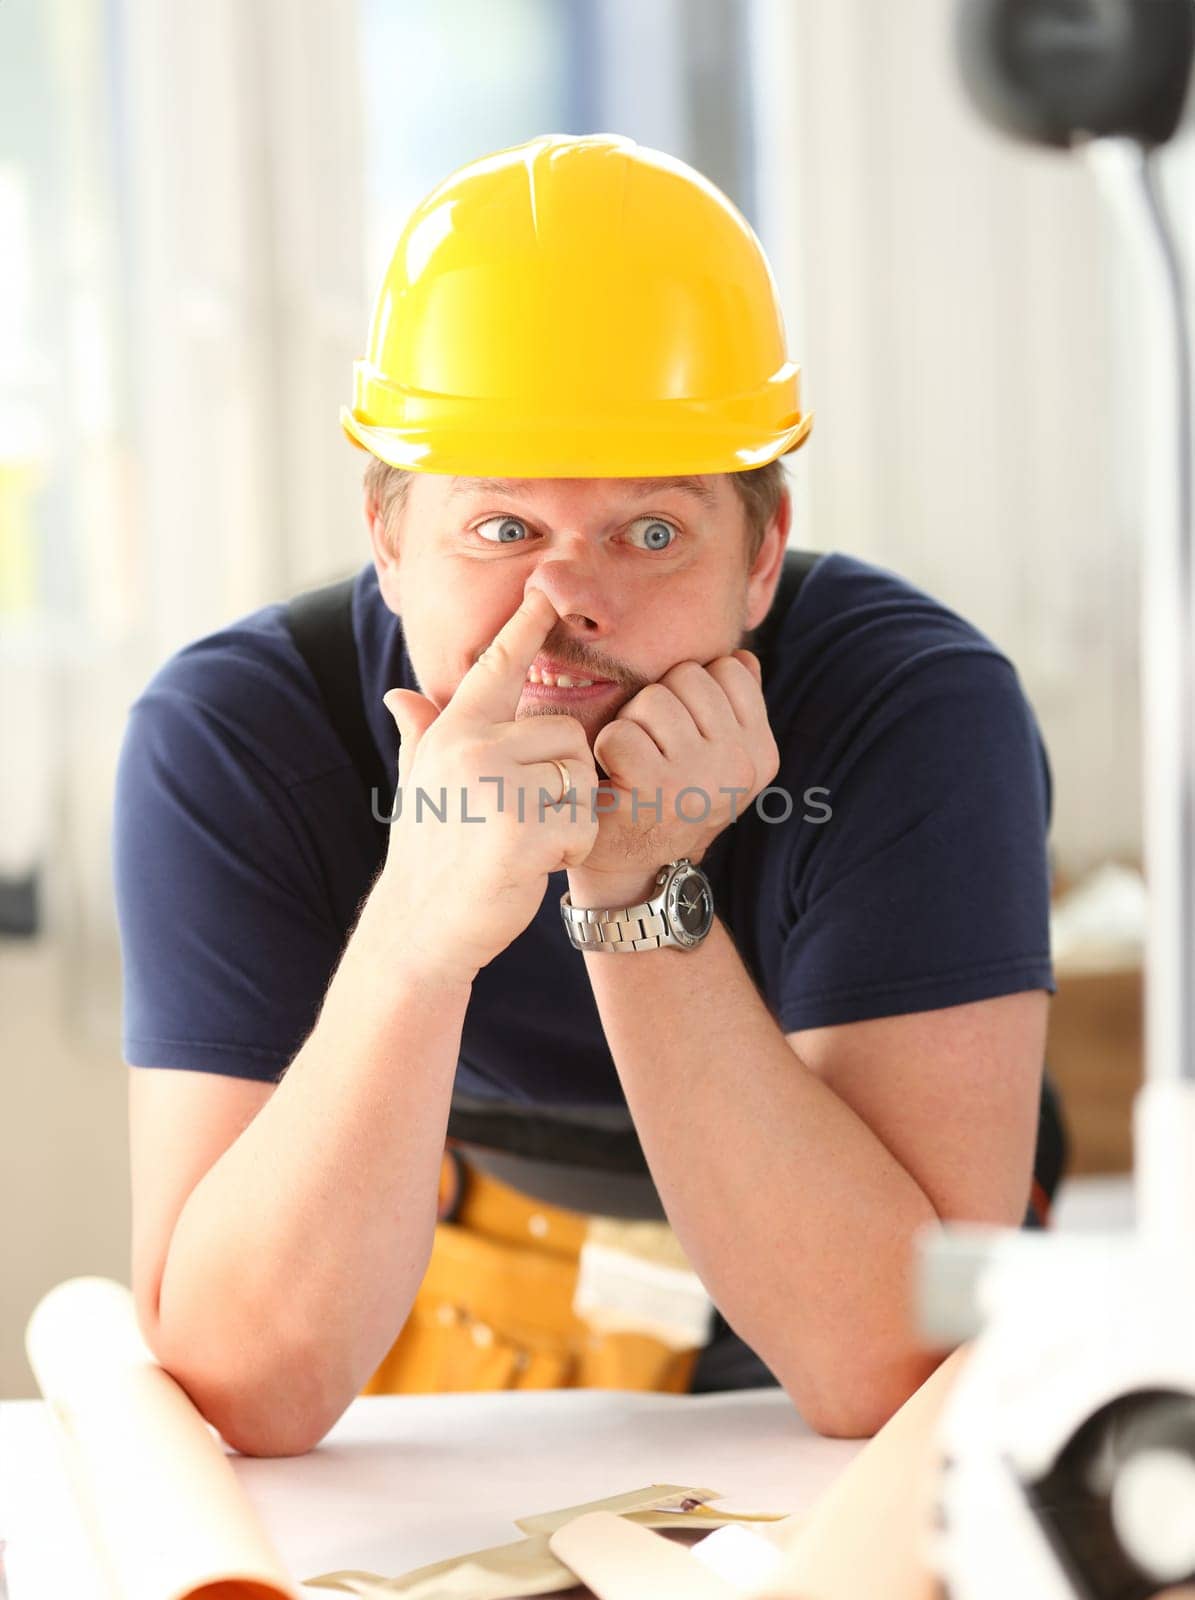 Smiling funny worker in yellow helmet posing with finger in nose. Manual job workplace DIY inspiration improvement fix shop hard hat joinery startup idea industrial education profession career